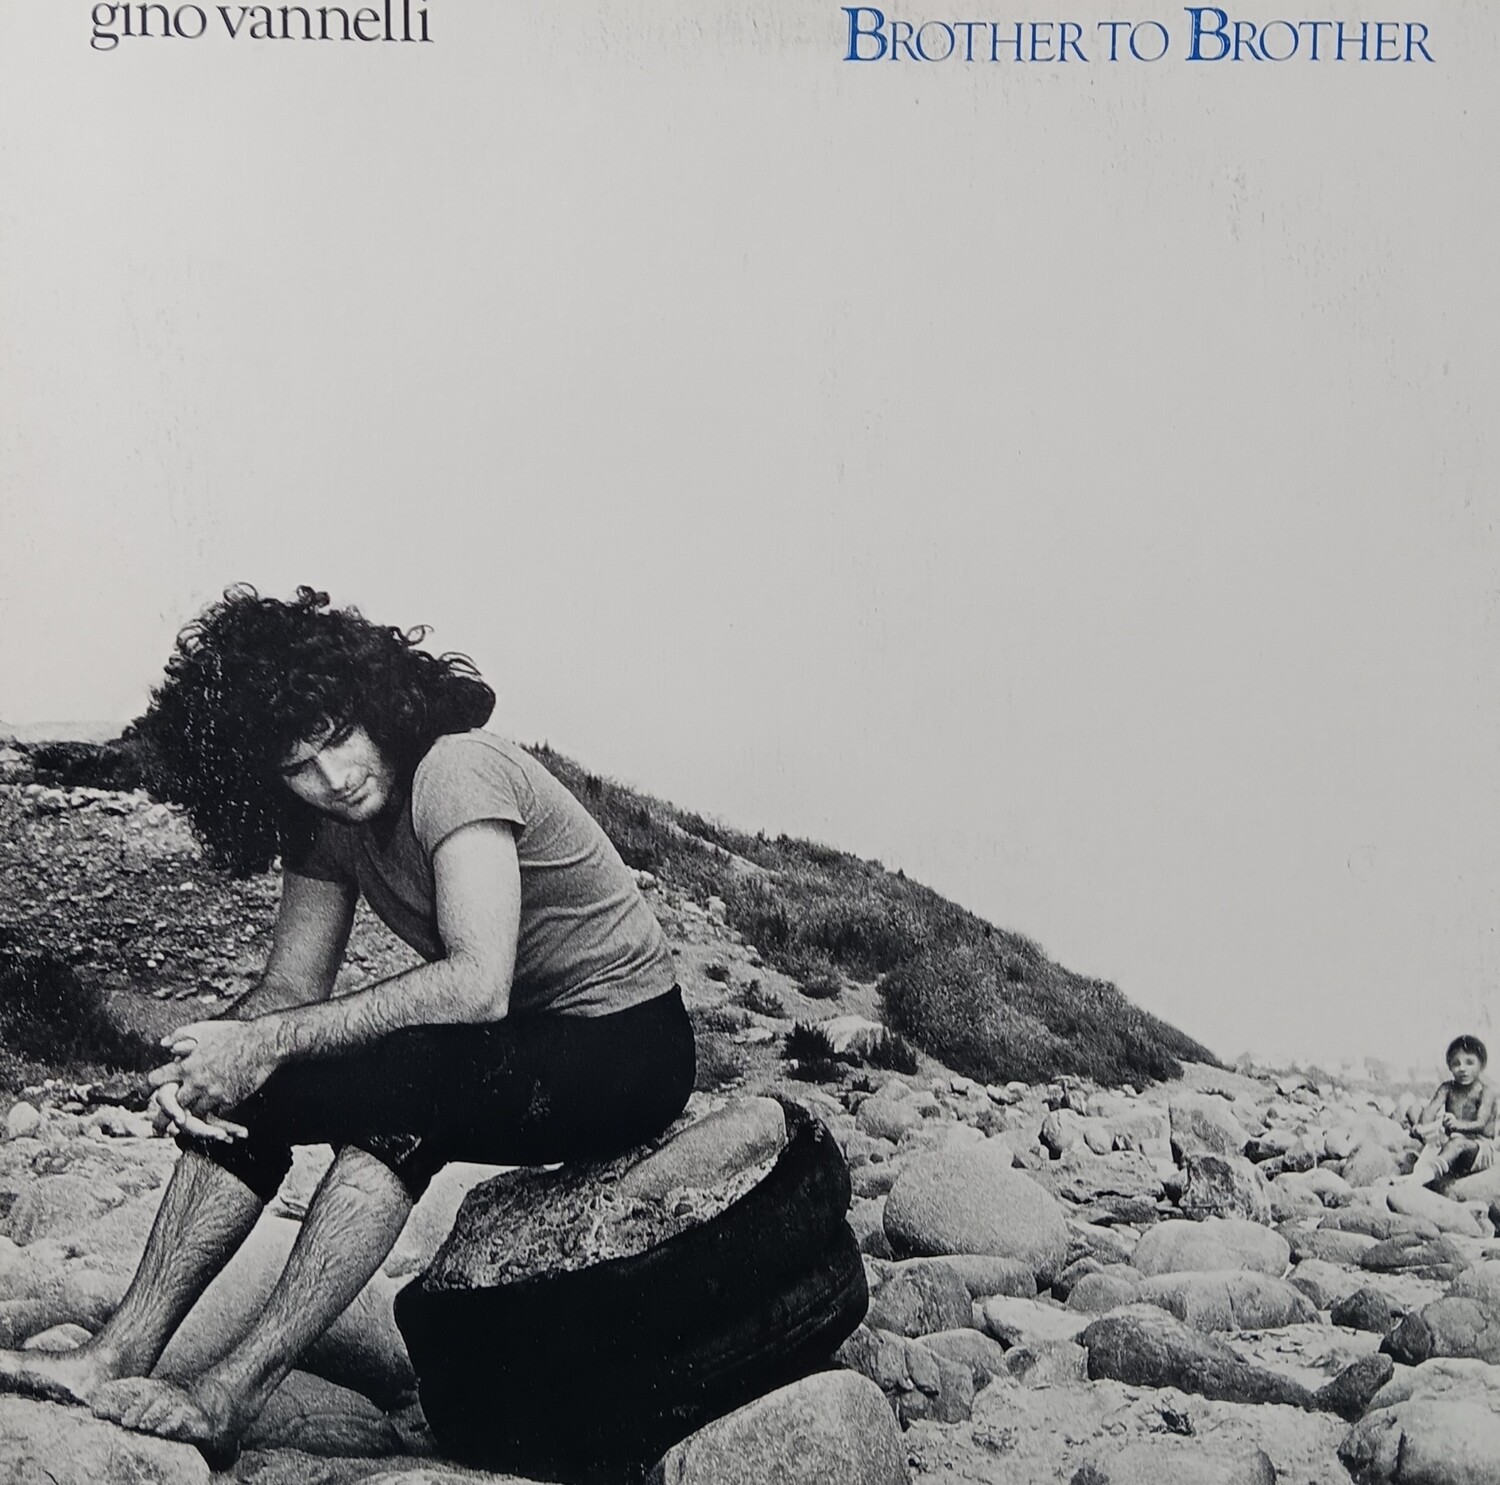 GINO VANNELLI - Brother to brother